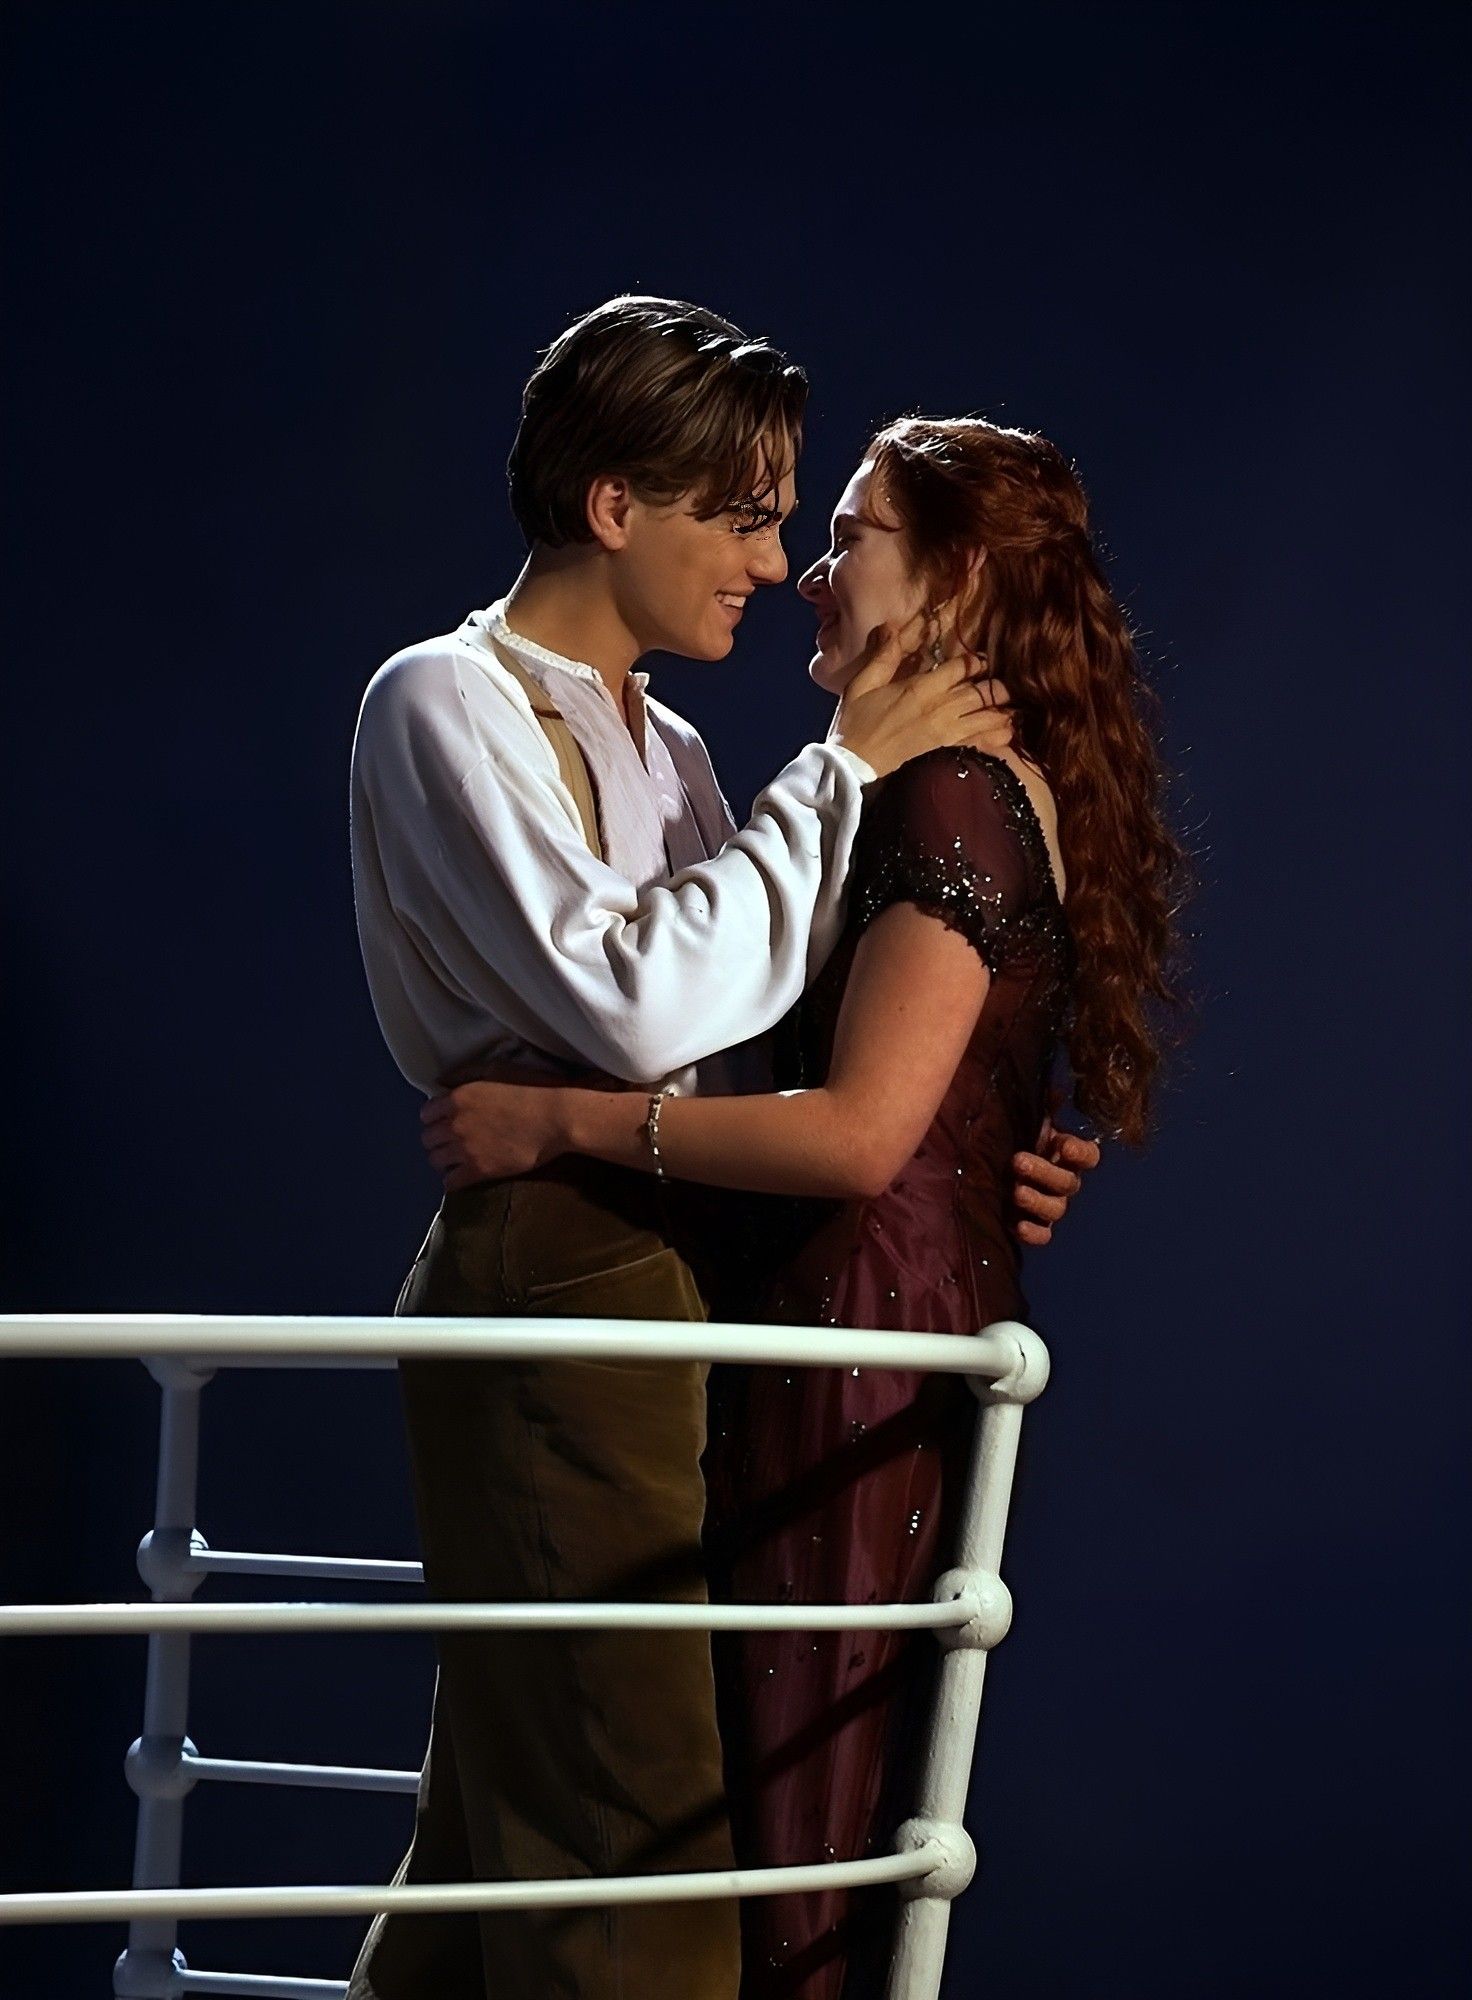 A man and woman are standing on the deck of ship - Leonardo DiCaprio